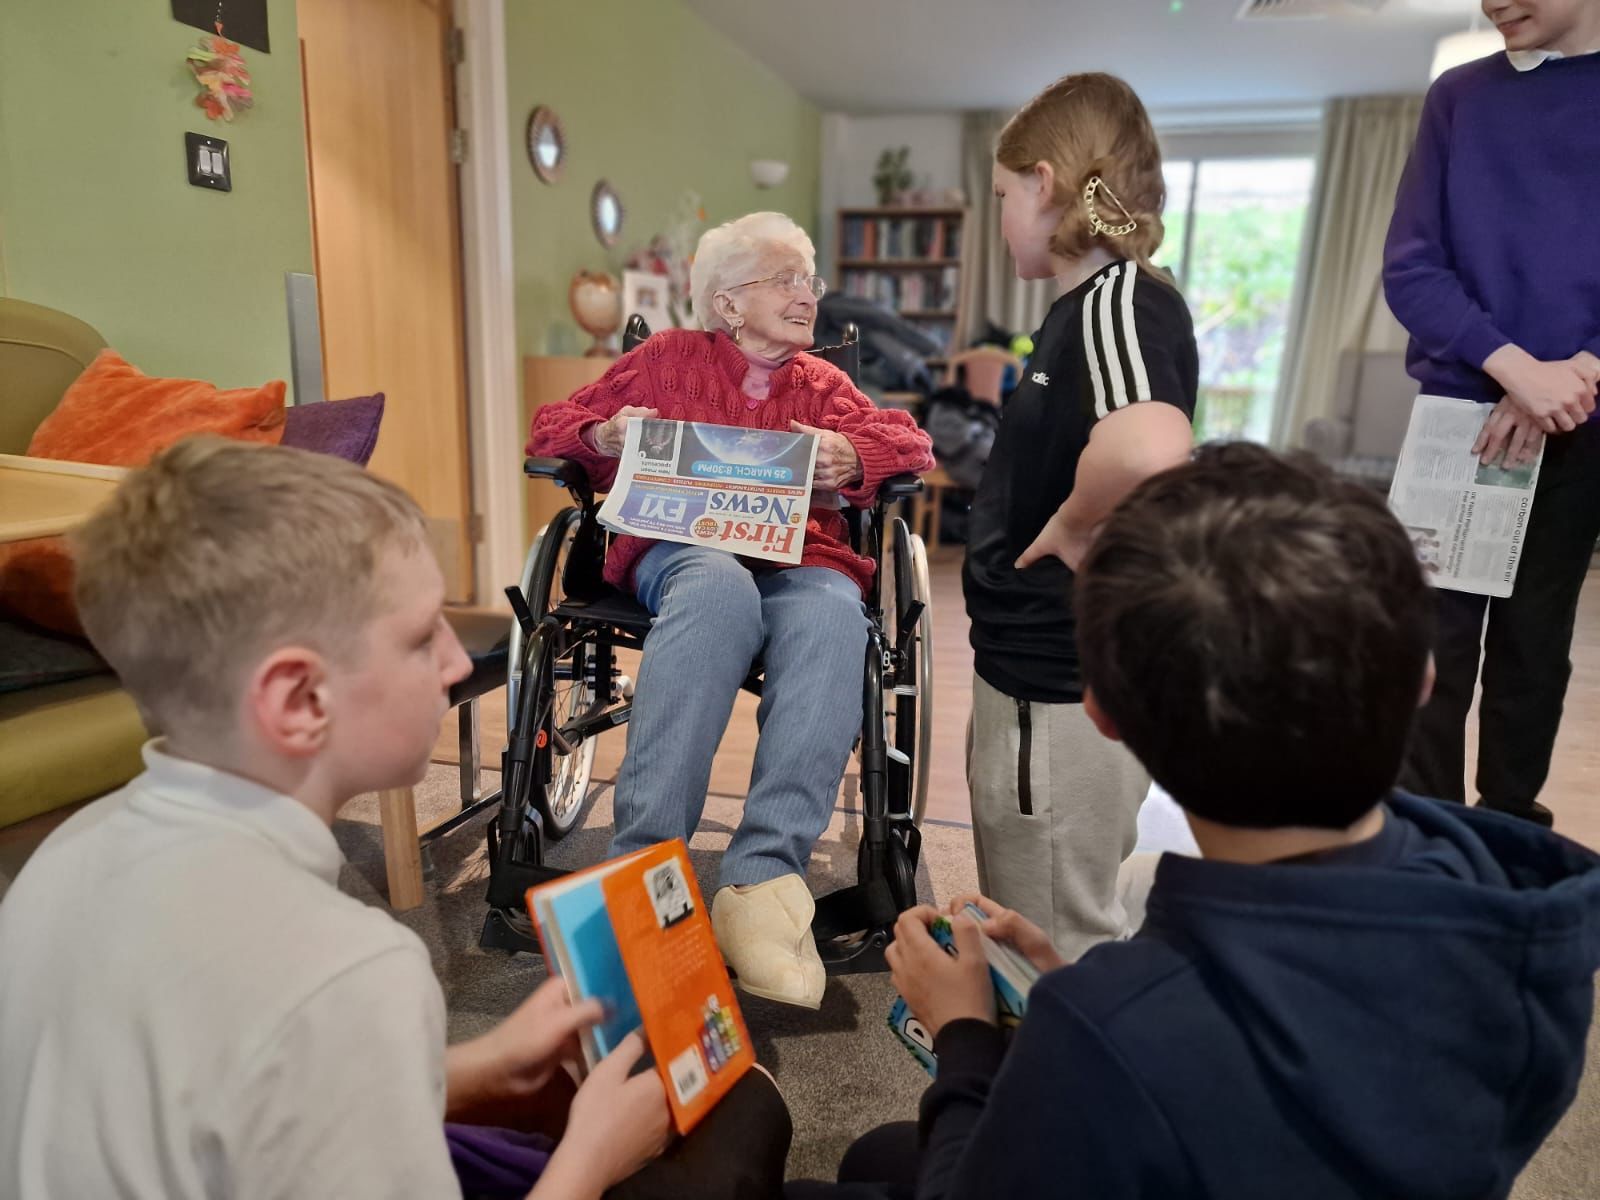  Pupils from Westwood CP School visit residents of Marleyfield Care Home in Buckley.